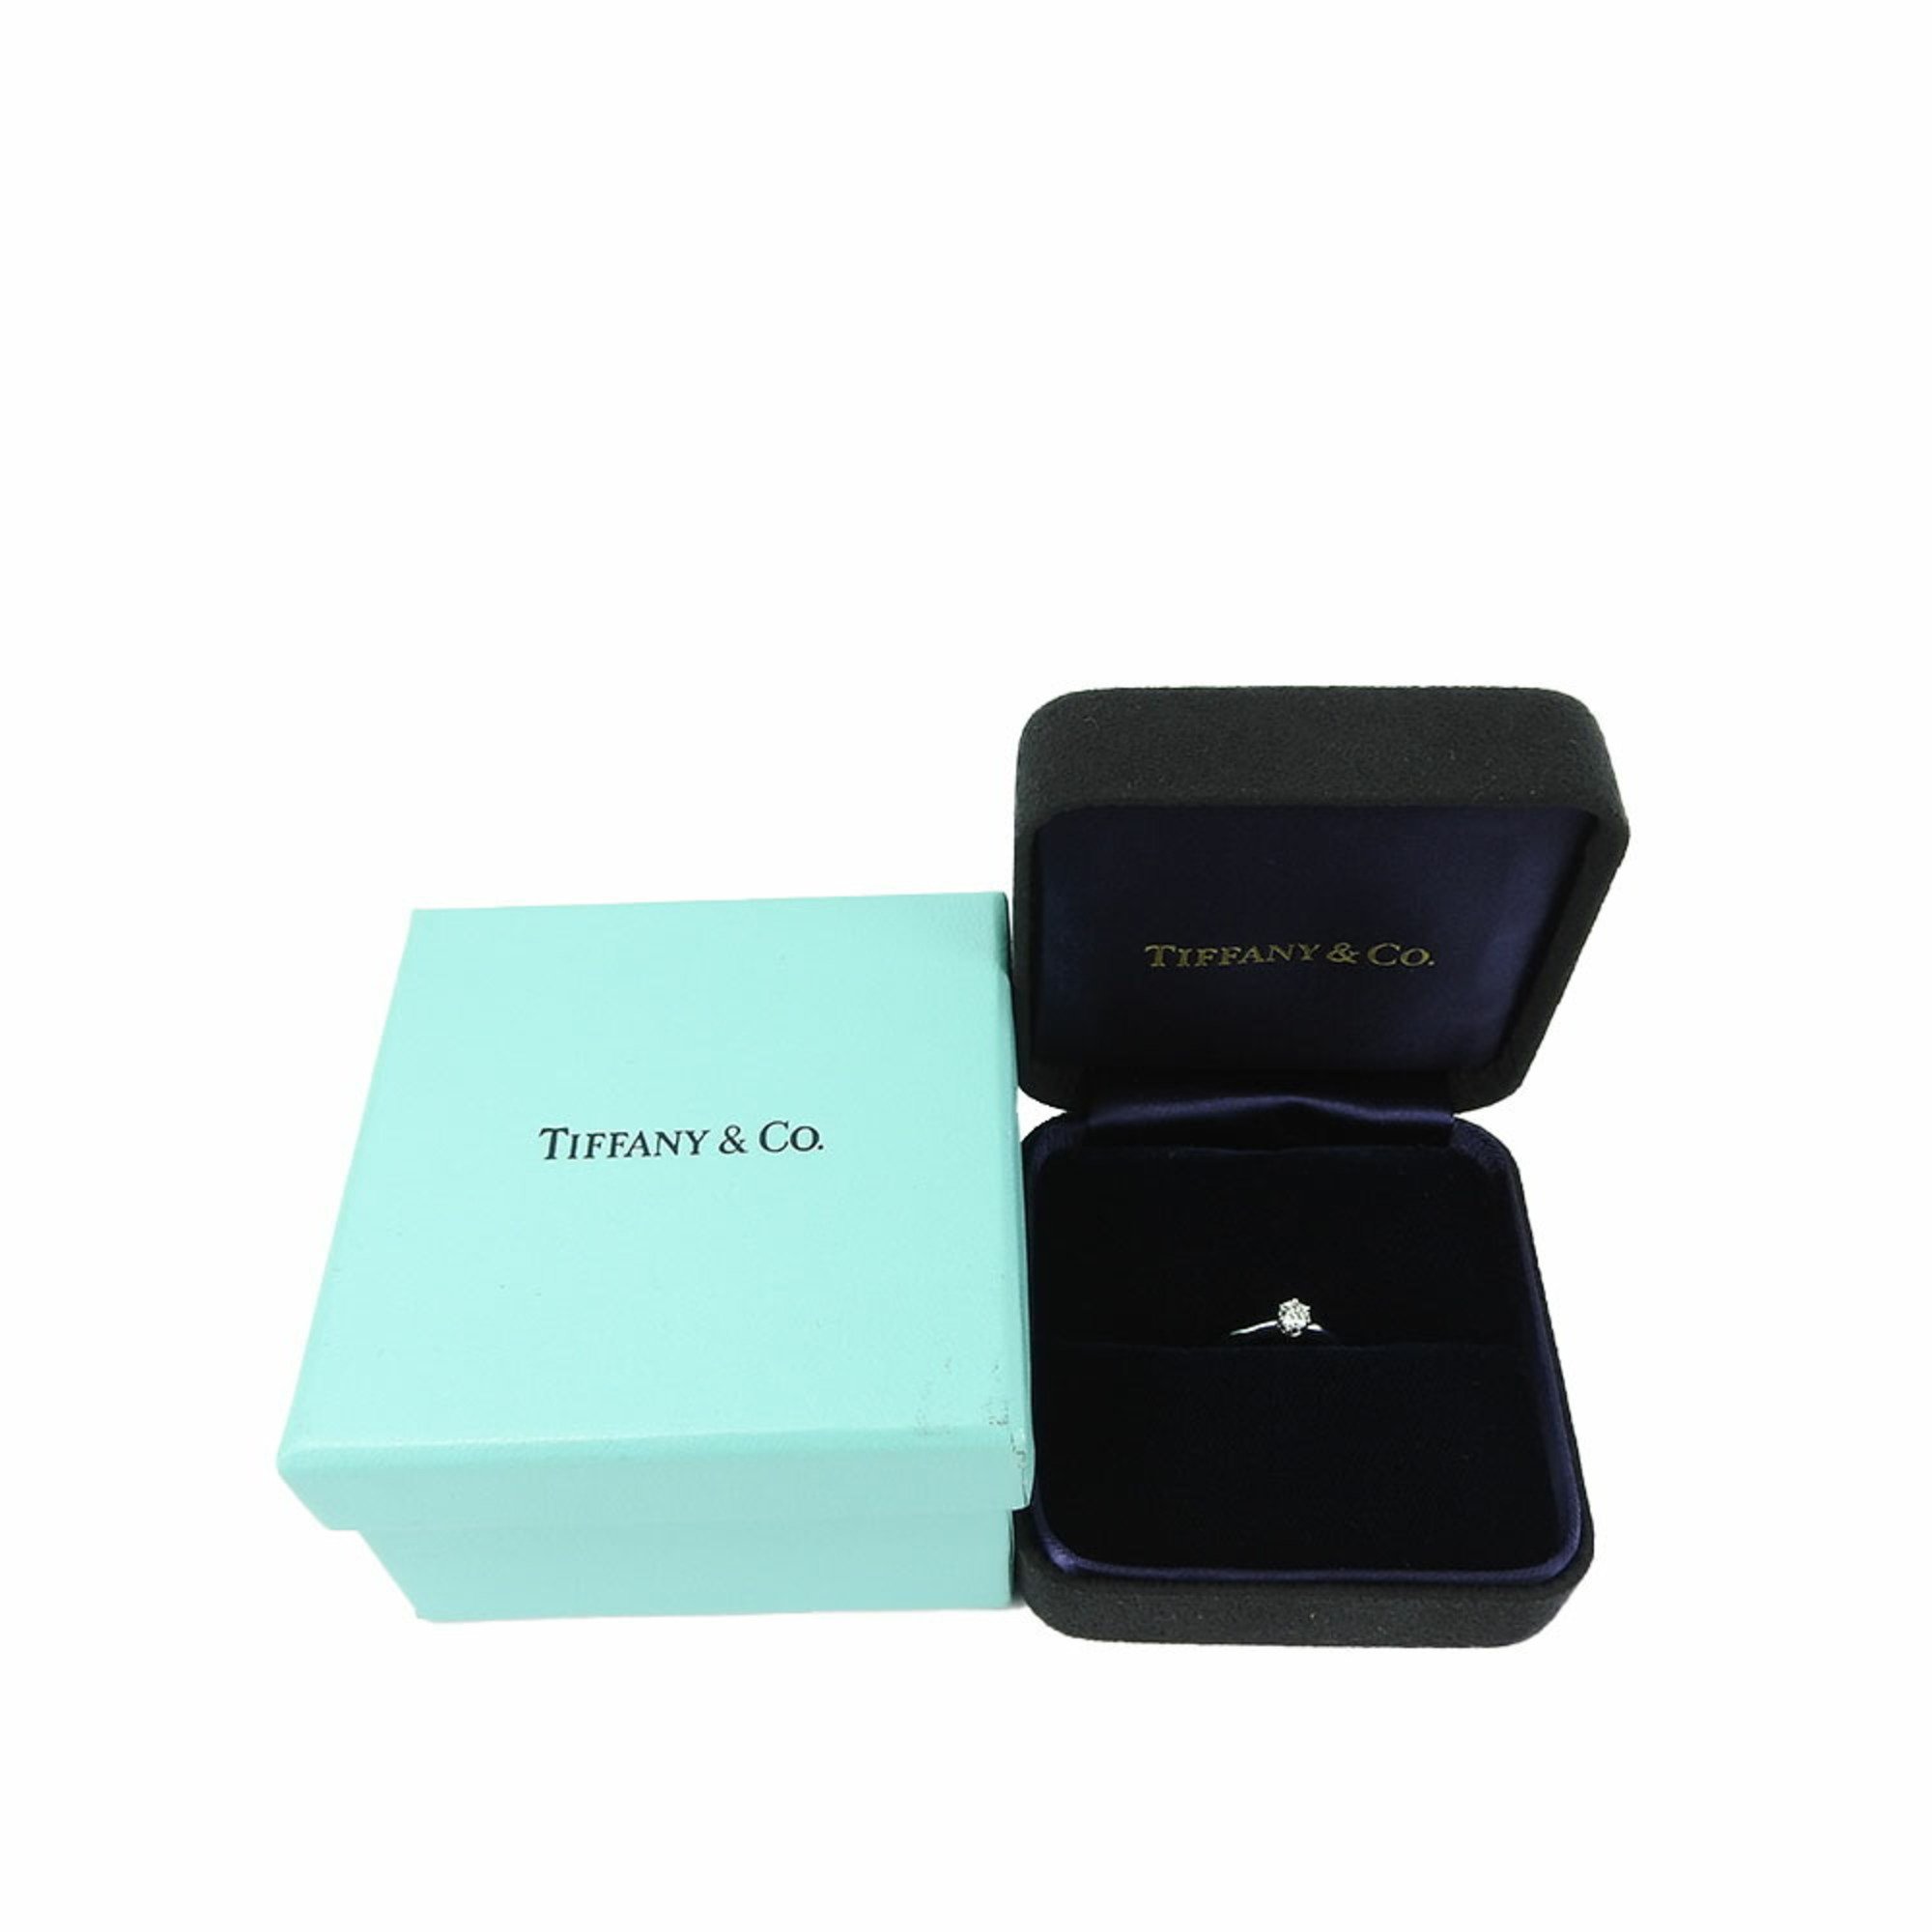 Tiffany Ring Setting Solitaire Pt950 Diamond Approx. 3.1g Platinum Engagement for Women TIFFANY&Co.